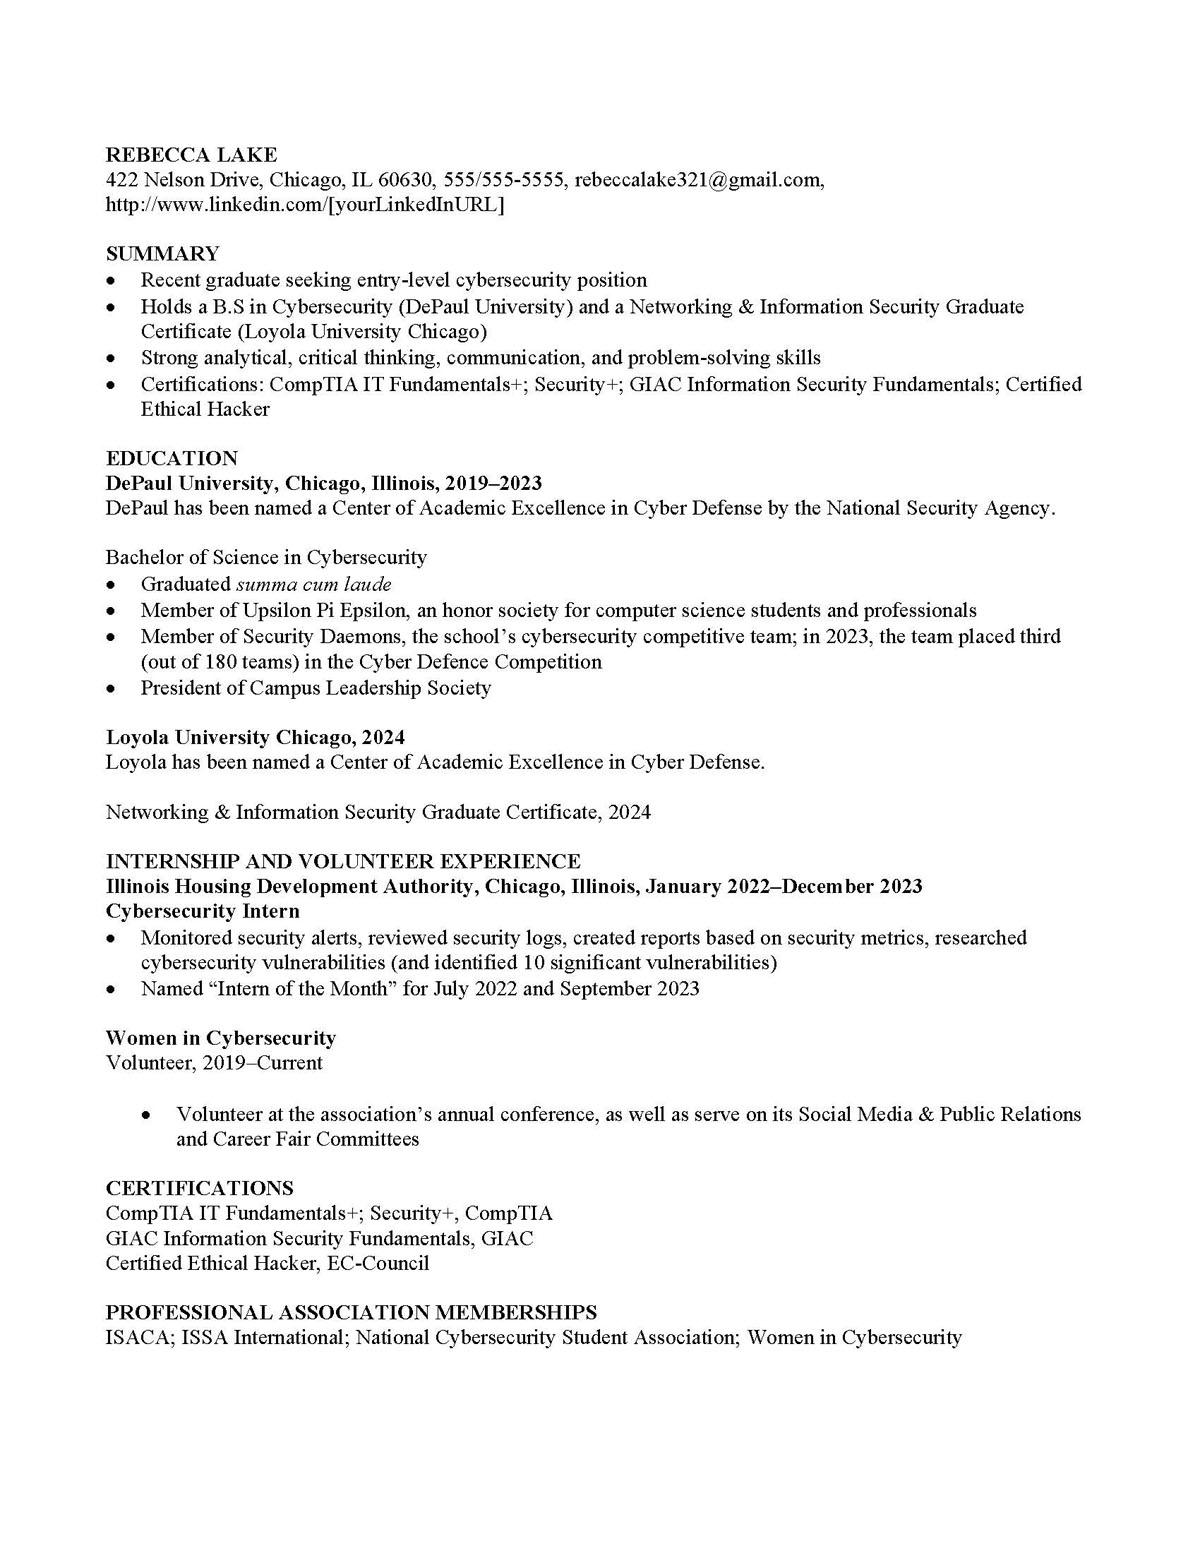 Sample resume: Cybersecurity, Entry Level, Functional